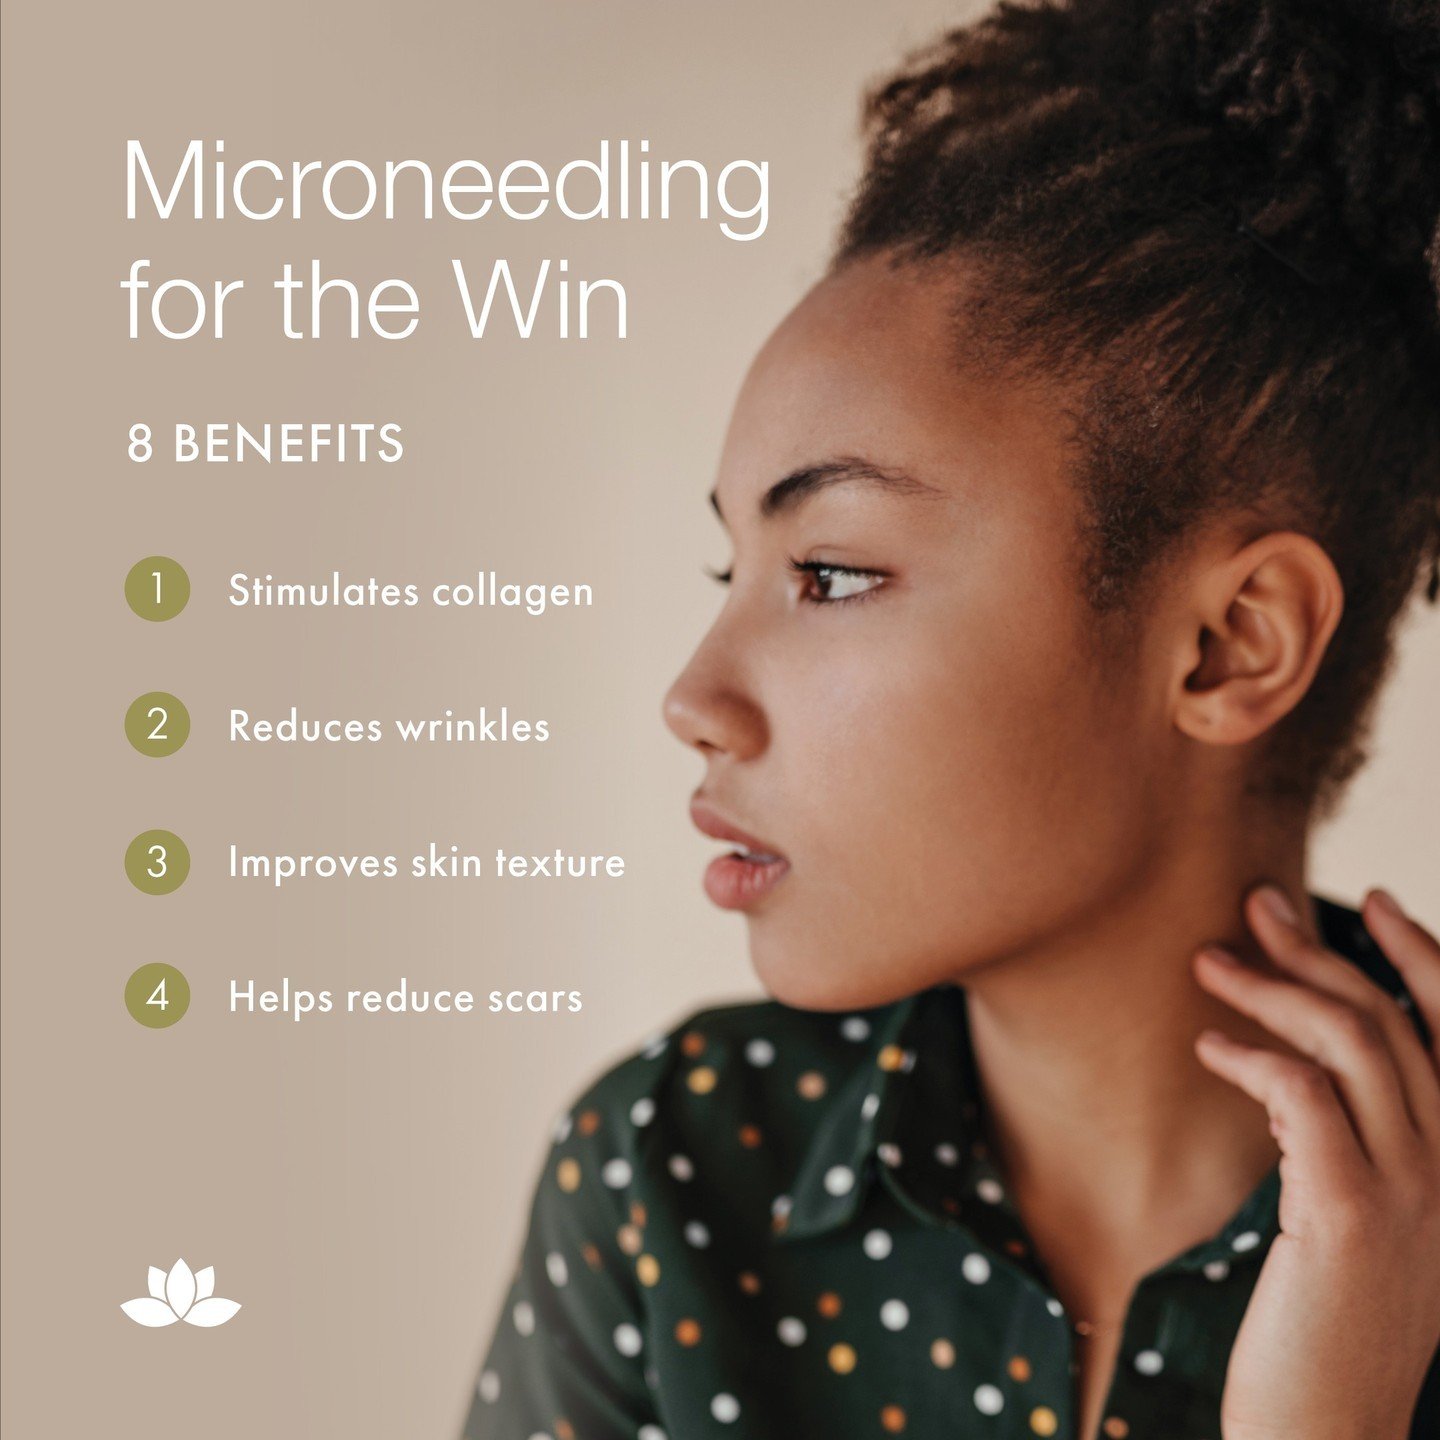 Microneedling, also known as collagen induction therapy, involves using a device with fine needles to create tiny punctures, or &quot;micro-injuries,&quot; in the skin. This process stimulates the body's natural healing response, leading to increased